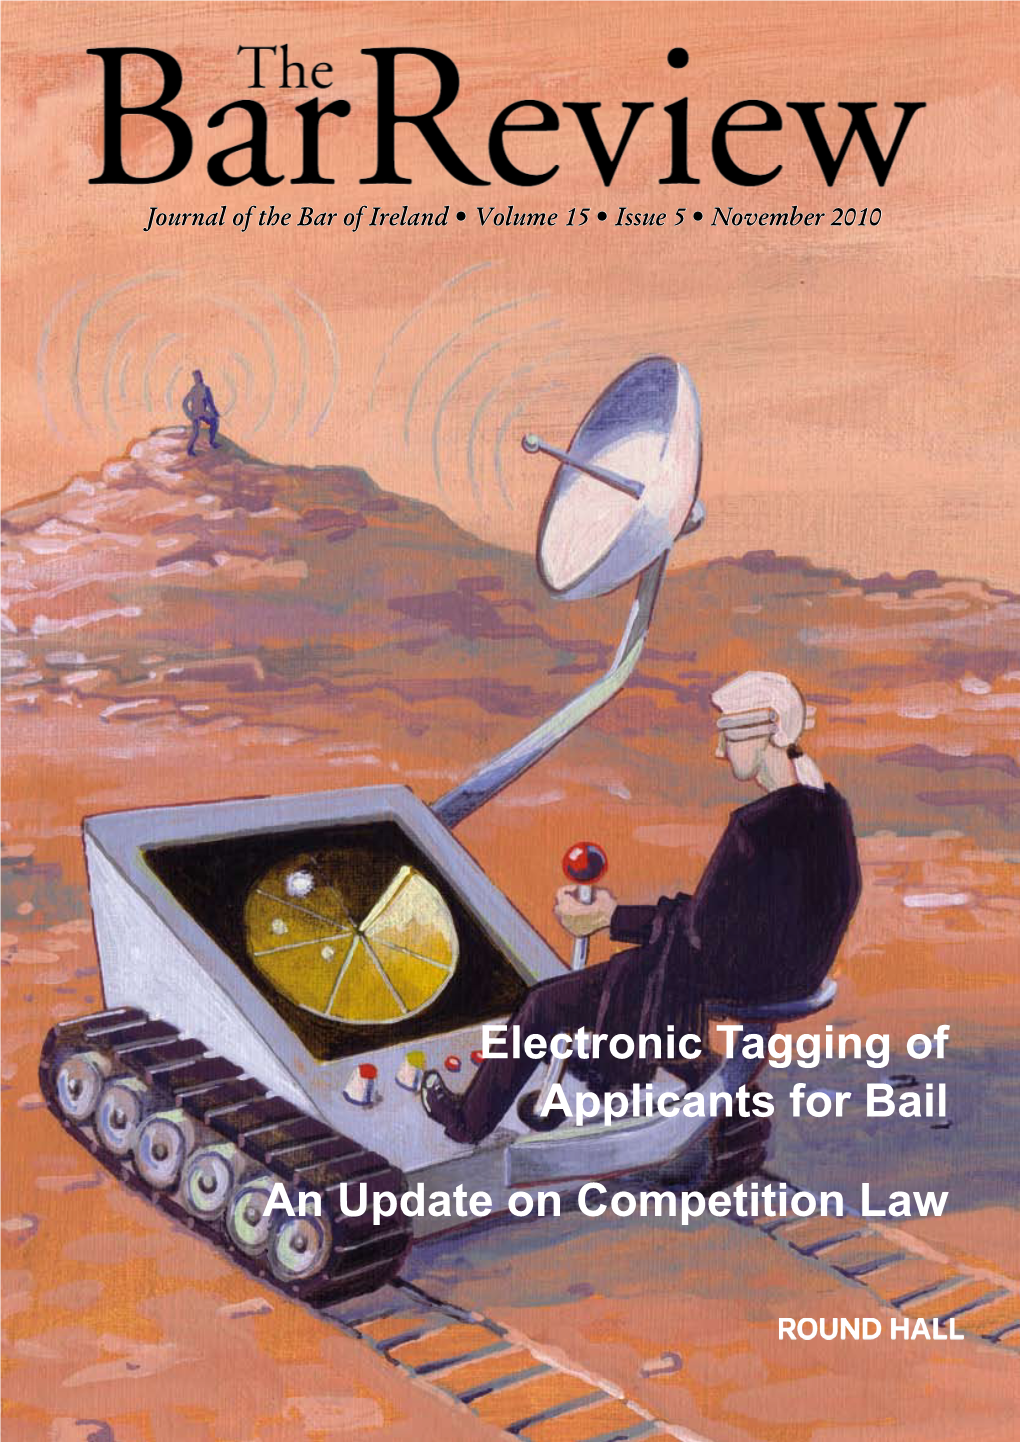 Electronic Tagging of Applicants for Bail an Update on Competition